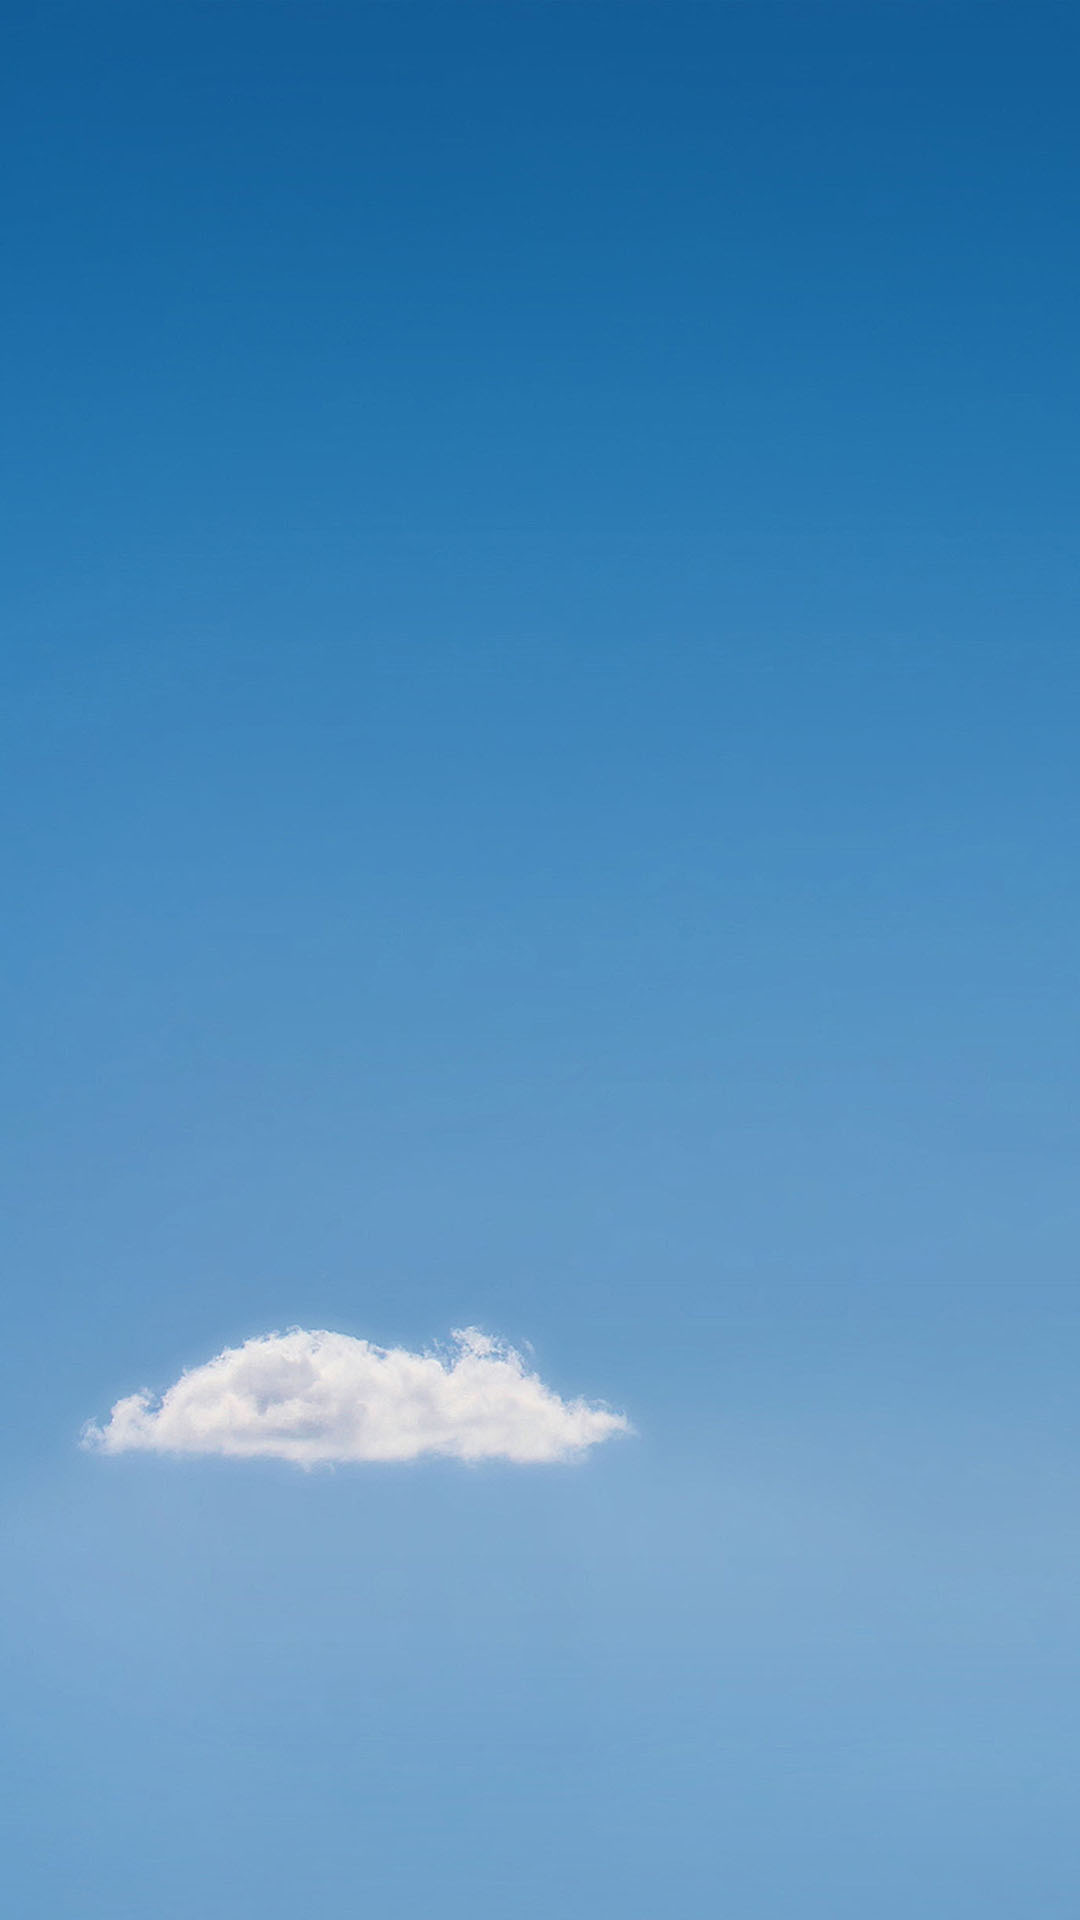 One cloud HTC one wallpaper - Best htc one wallpapers